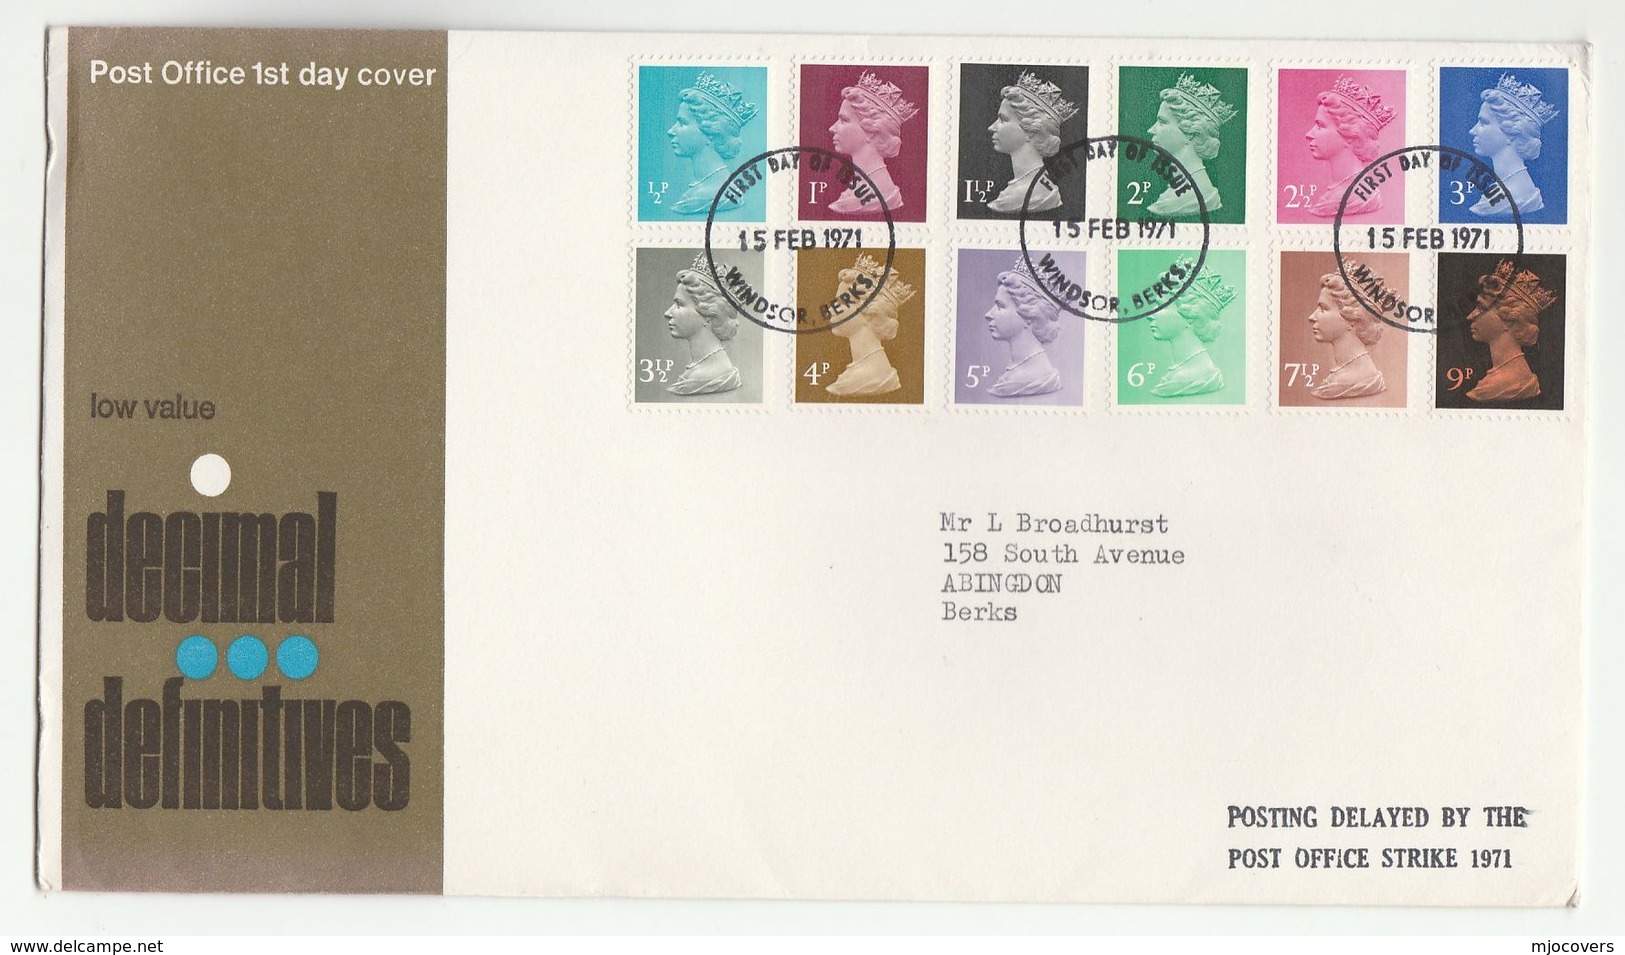 1971 Windsor GB COVER POSTING DELAYED BY POSTAL STRIKE Fdc Stamps Great Britain Postal Strike Definitives - 1971-1980 Decimal Issues